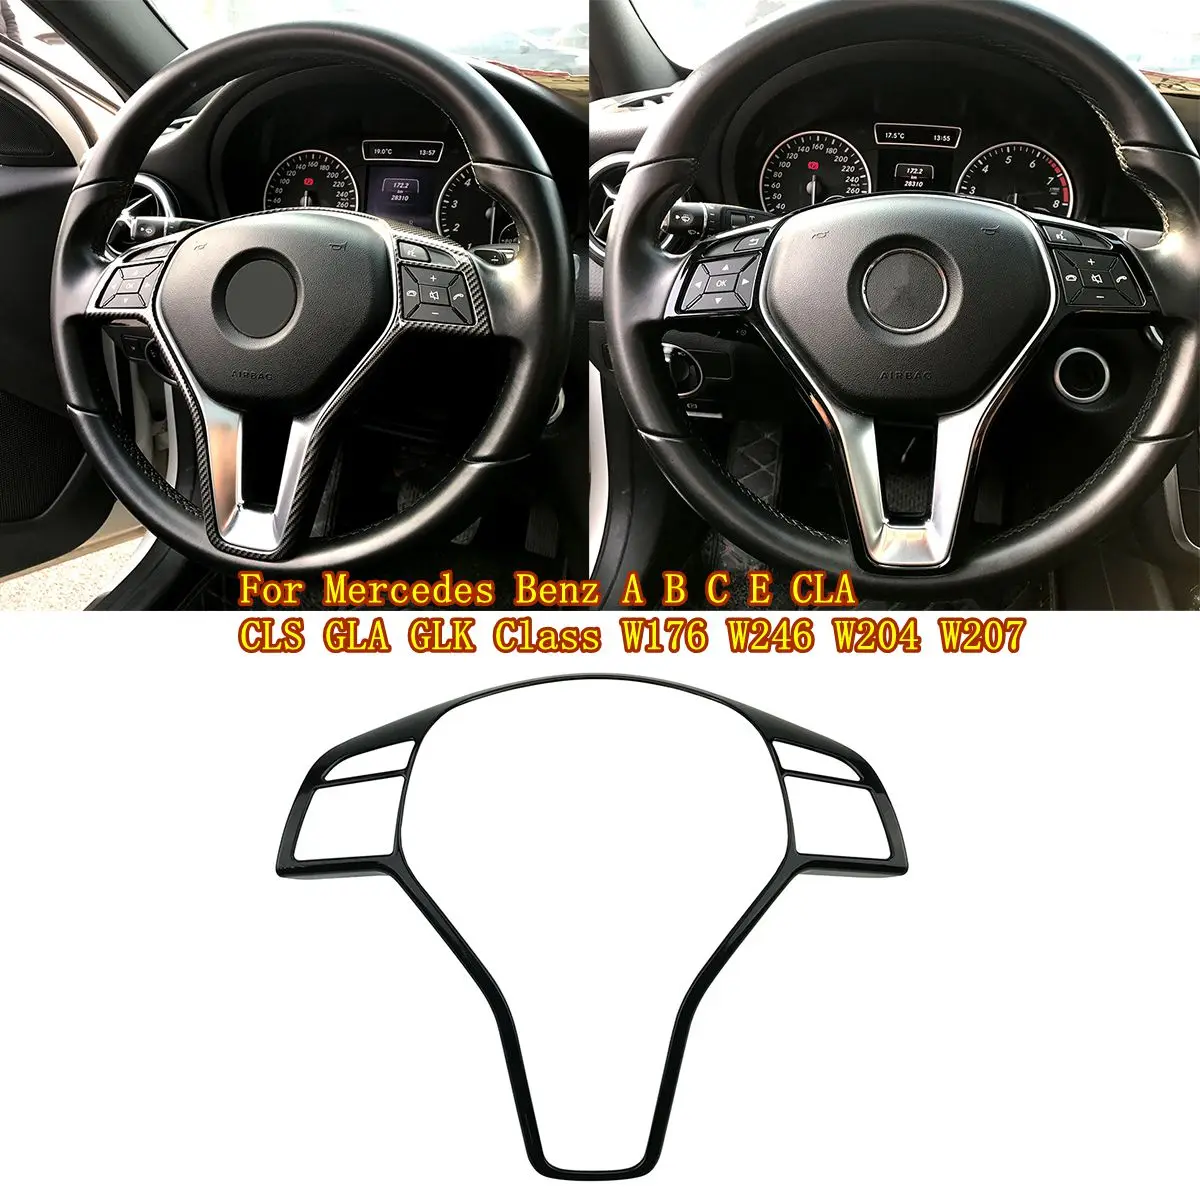 

Car Steering Wheel Frame Trim Cover For Mercedes Benz A B C E CLA CLS GLA GLK Class W176 W246 W204 W207 W212 W117 W218 X156